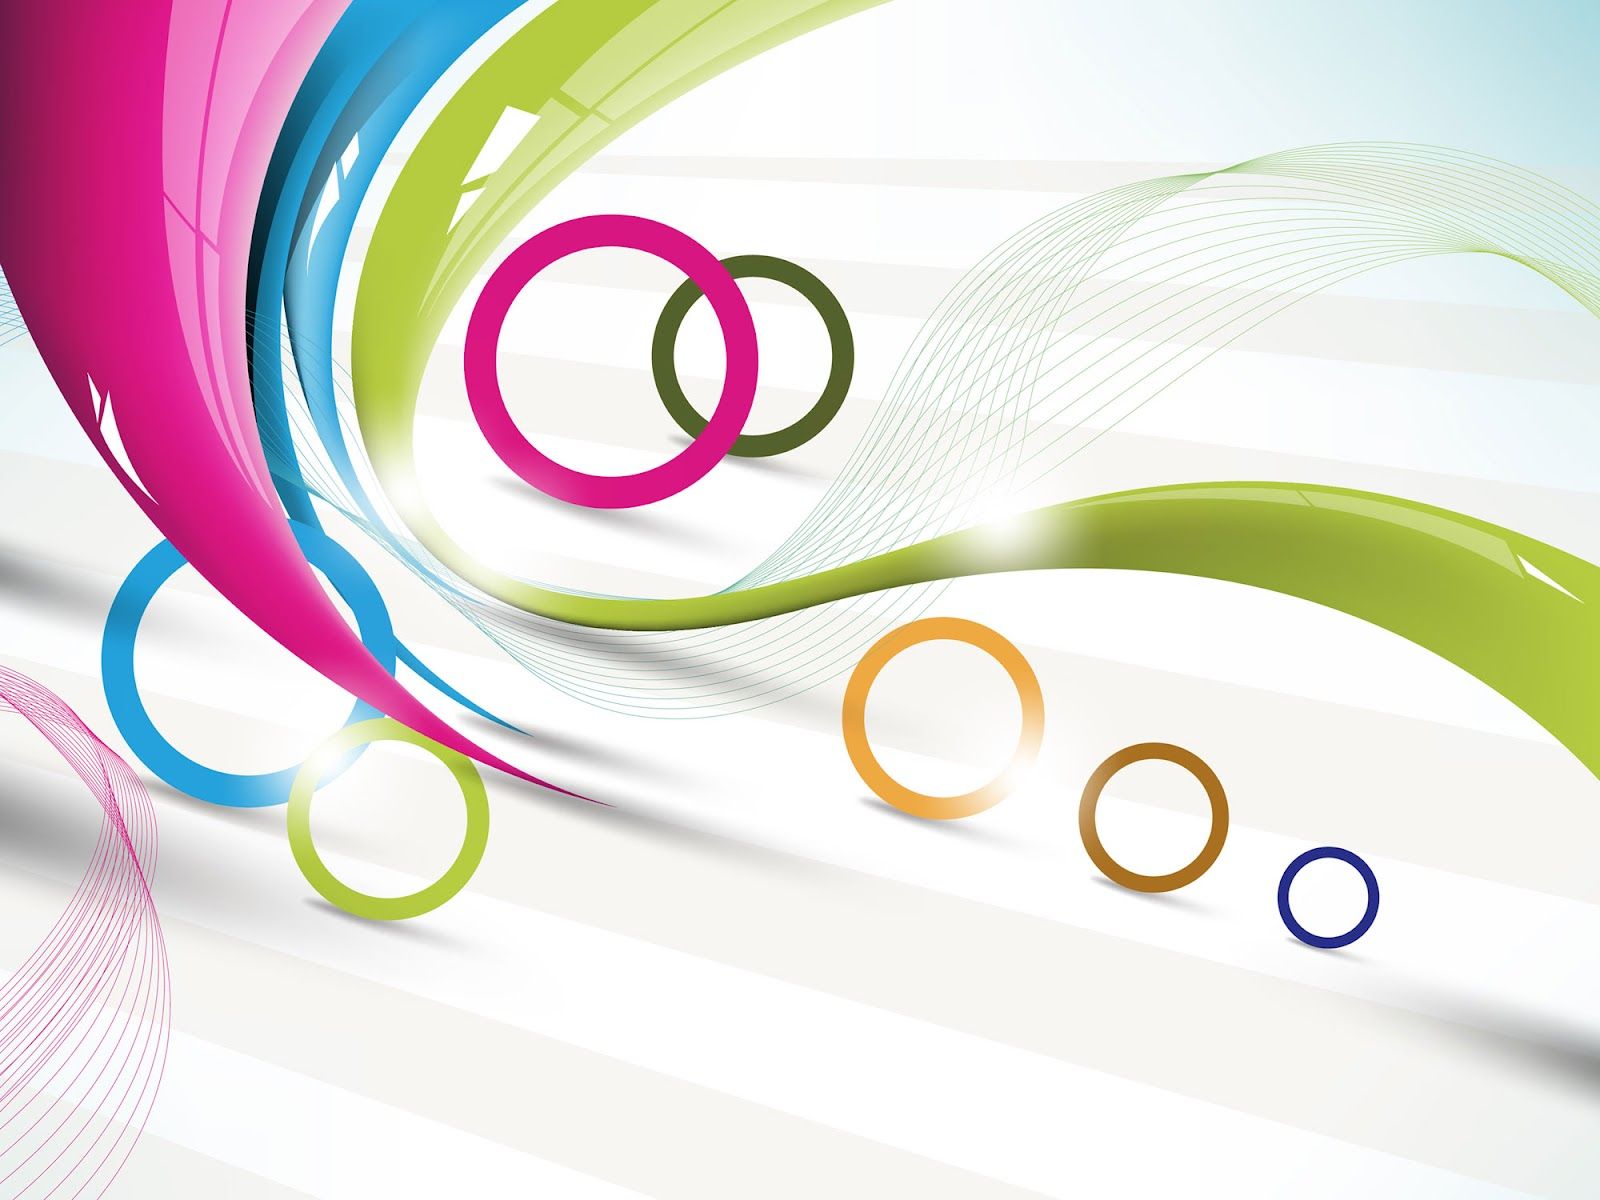 Abstract Circles Vector Background